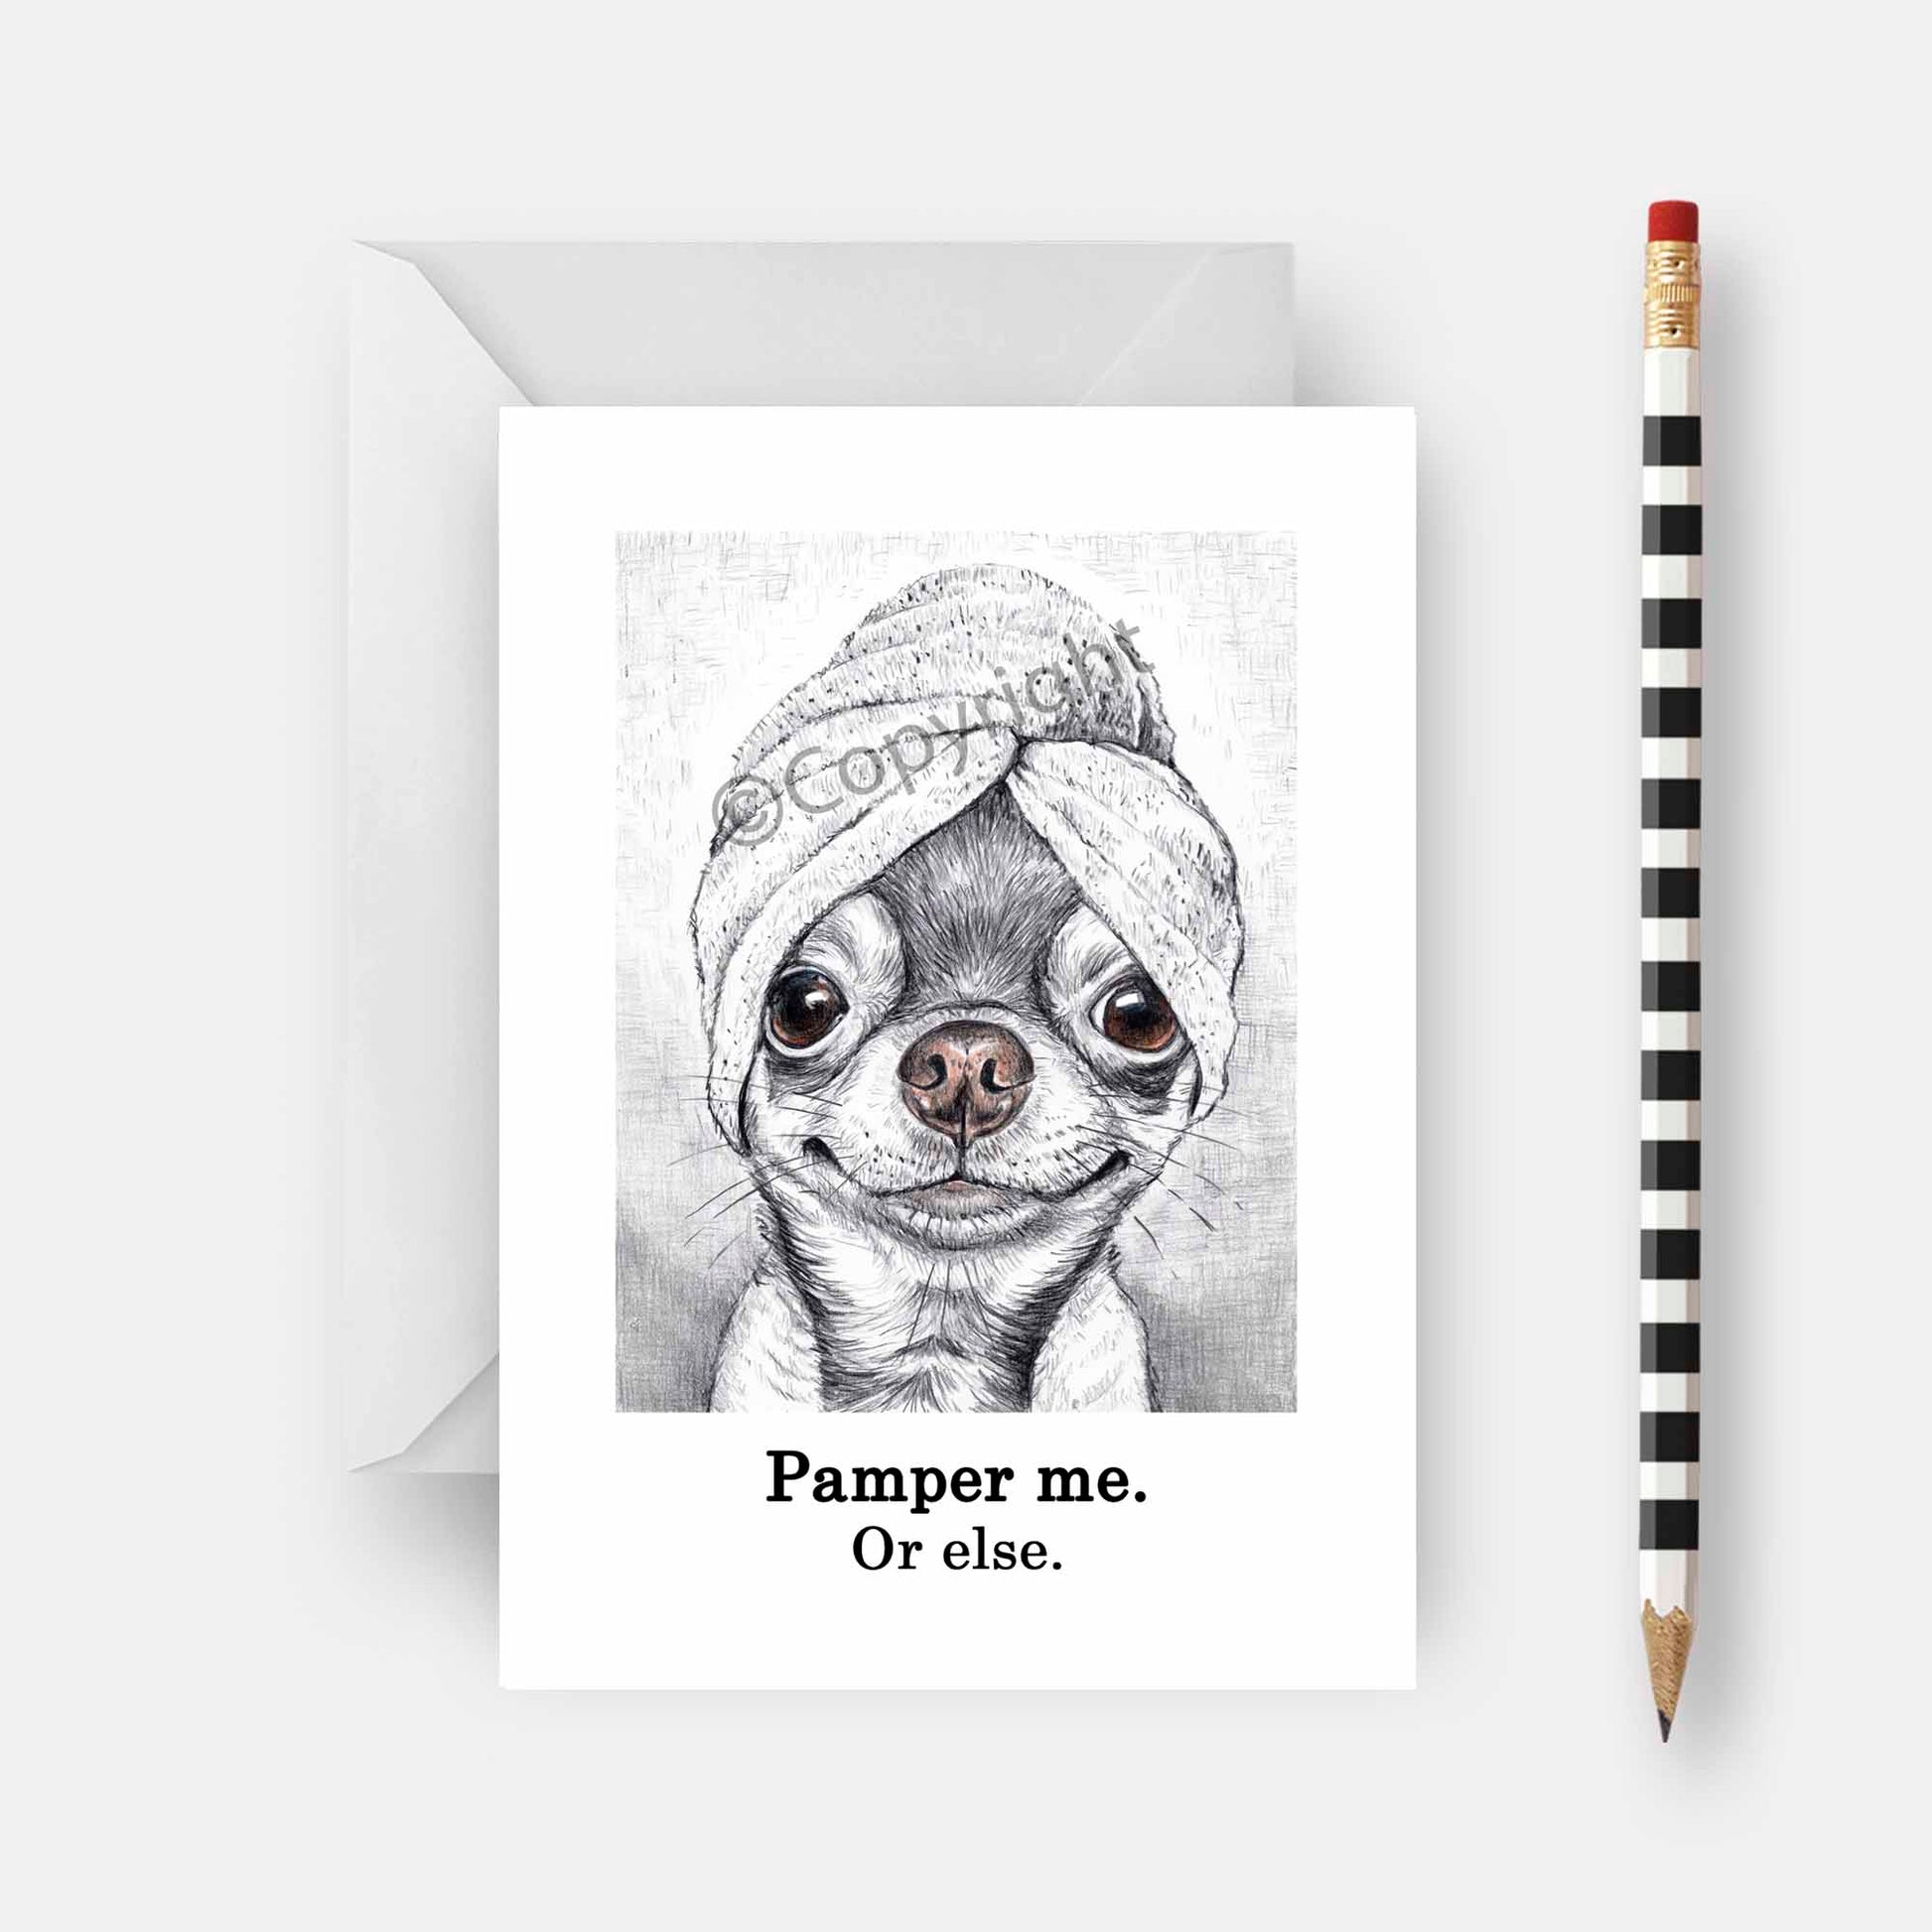 Greeting card featuring a crayon drawing of a sassy chihuahua dog wearing a bath towel on her head. By Deidre Wicks